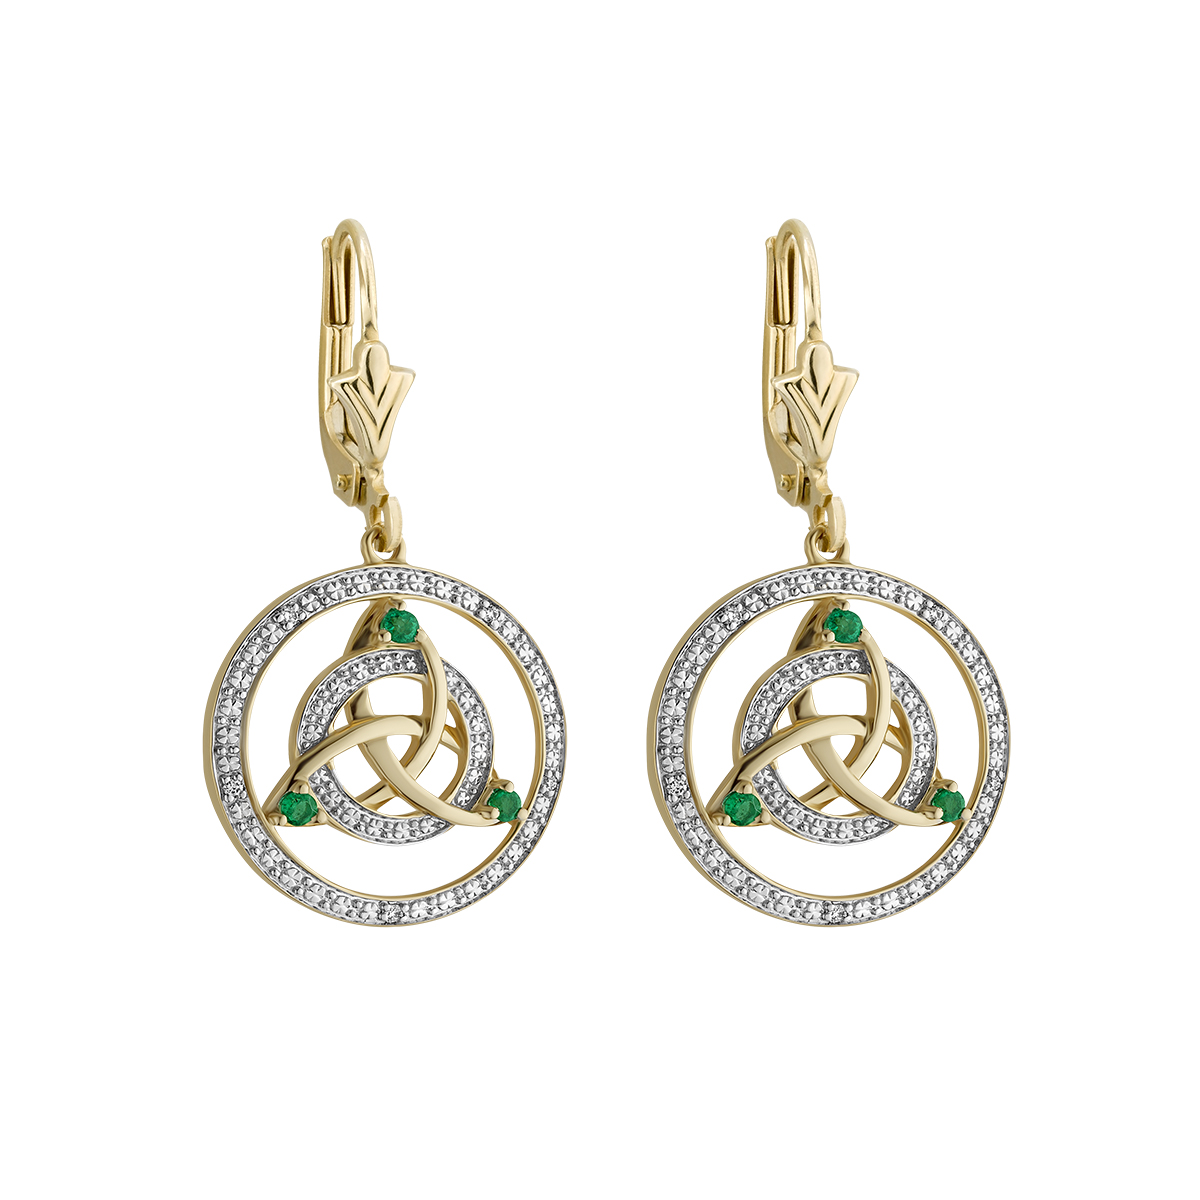 Product image for Irish Earrings | 14k Gold Diamond and Emerald Round Drop Celtic Knot Earrings